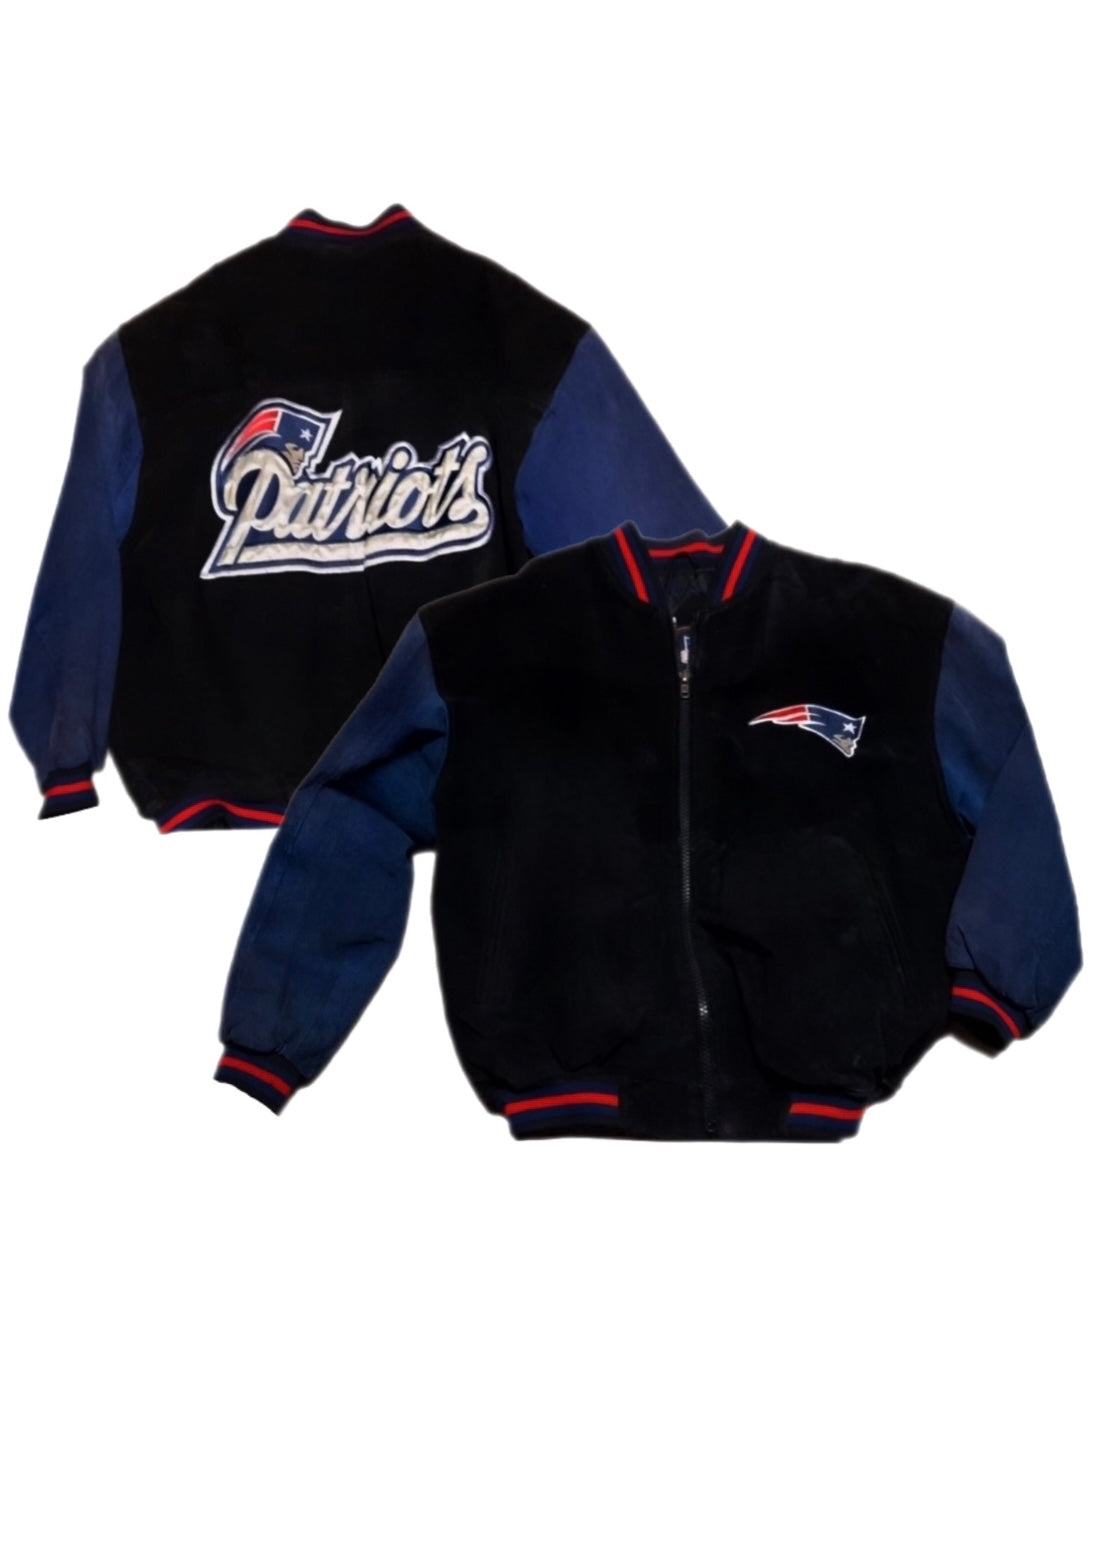 England Patriots, NFL One of a KIND Vintage Bomber Jacket with